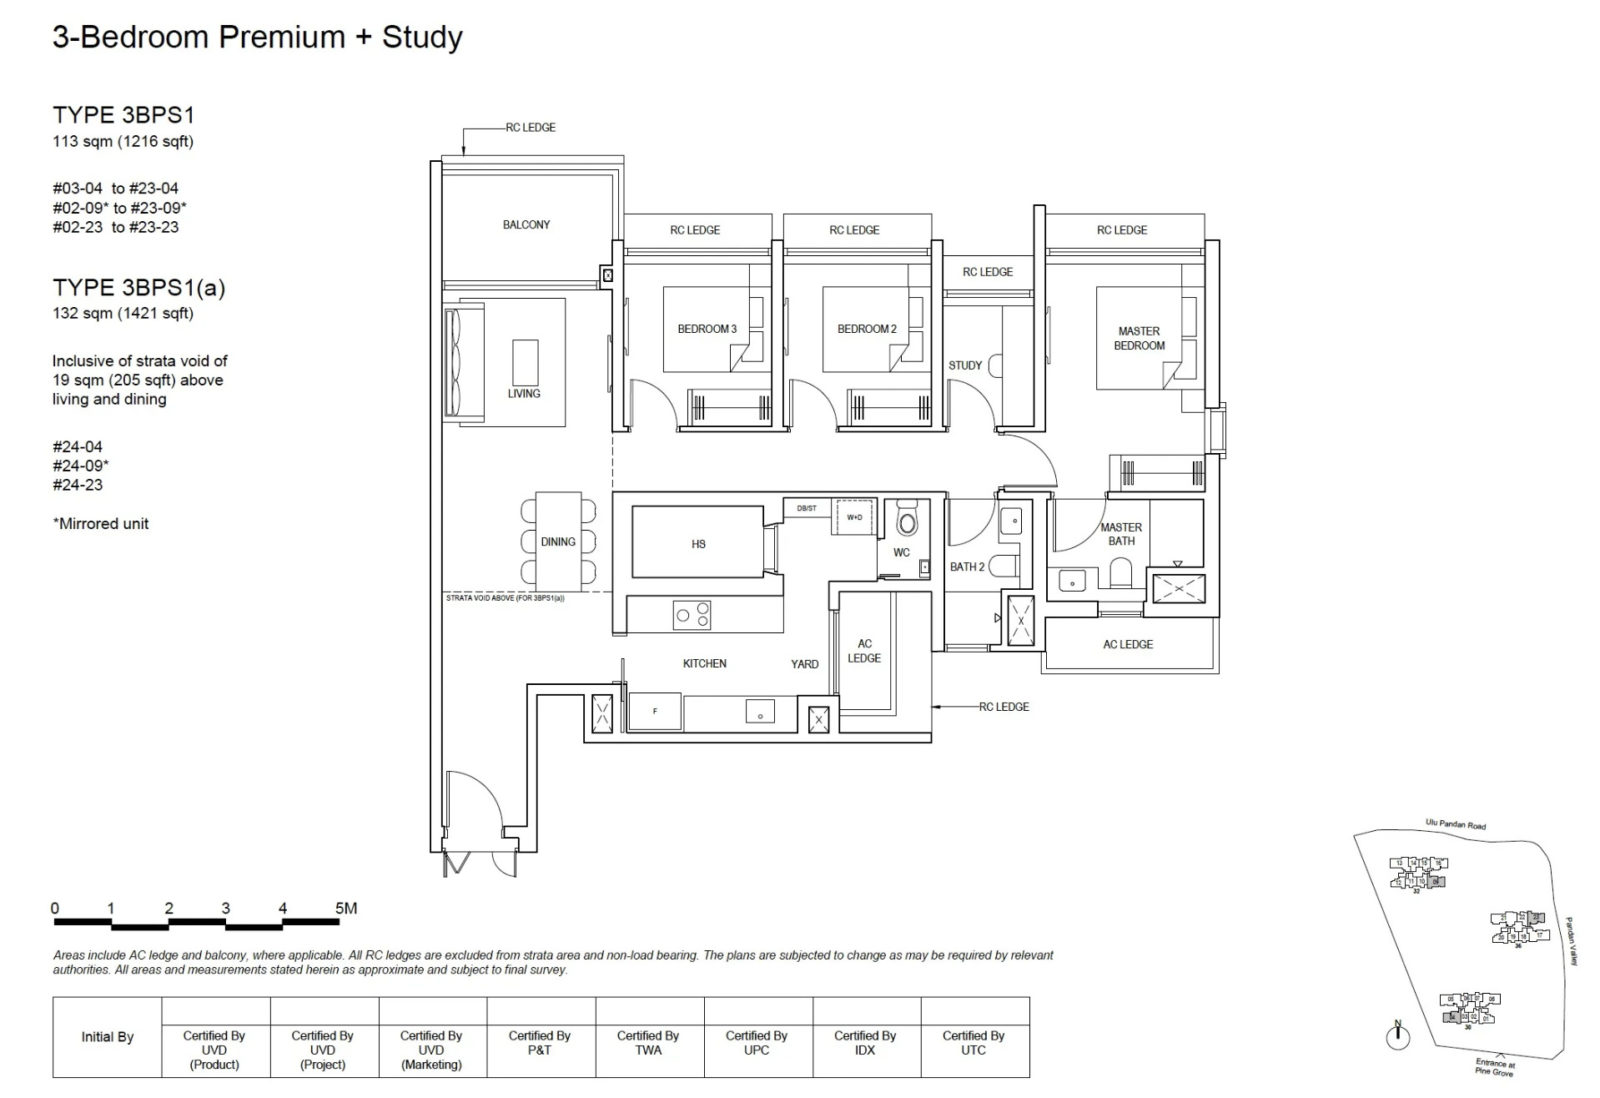 pinetree hill 3 bedroom study layout